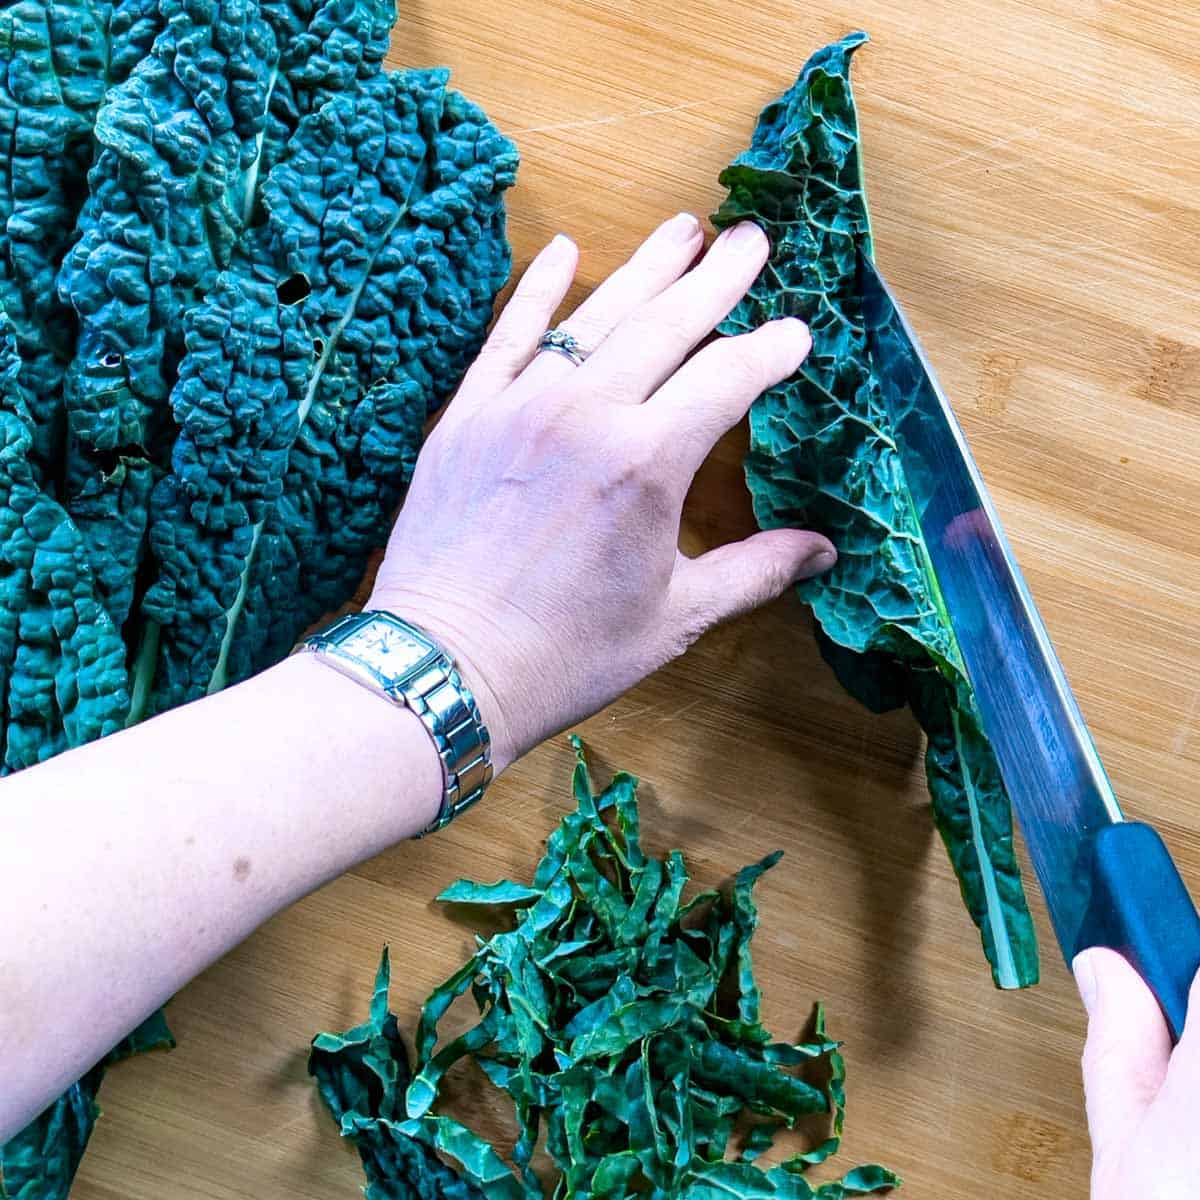 Kale whole and chopped leaves on a cutting board with a hand holding one leaf folded over, slicing the stem out with a knife.